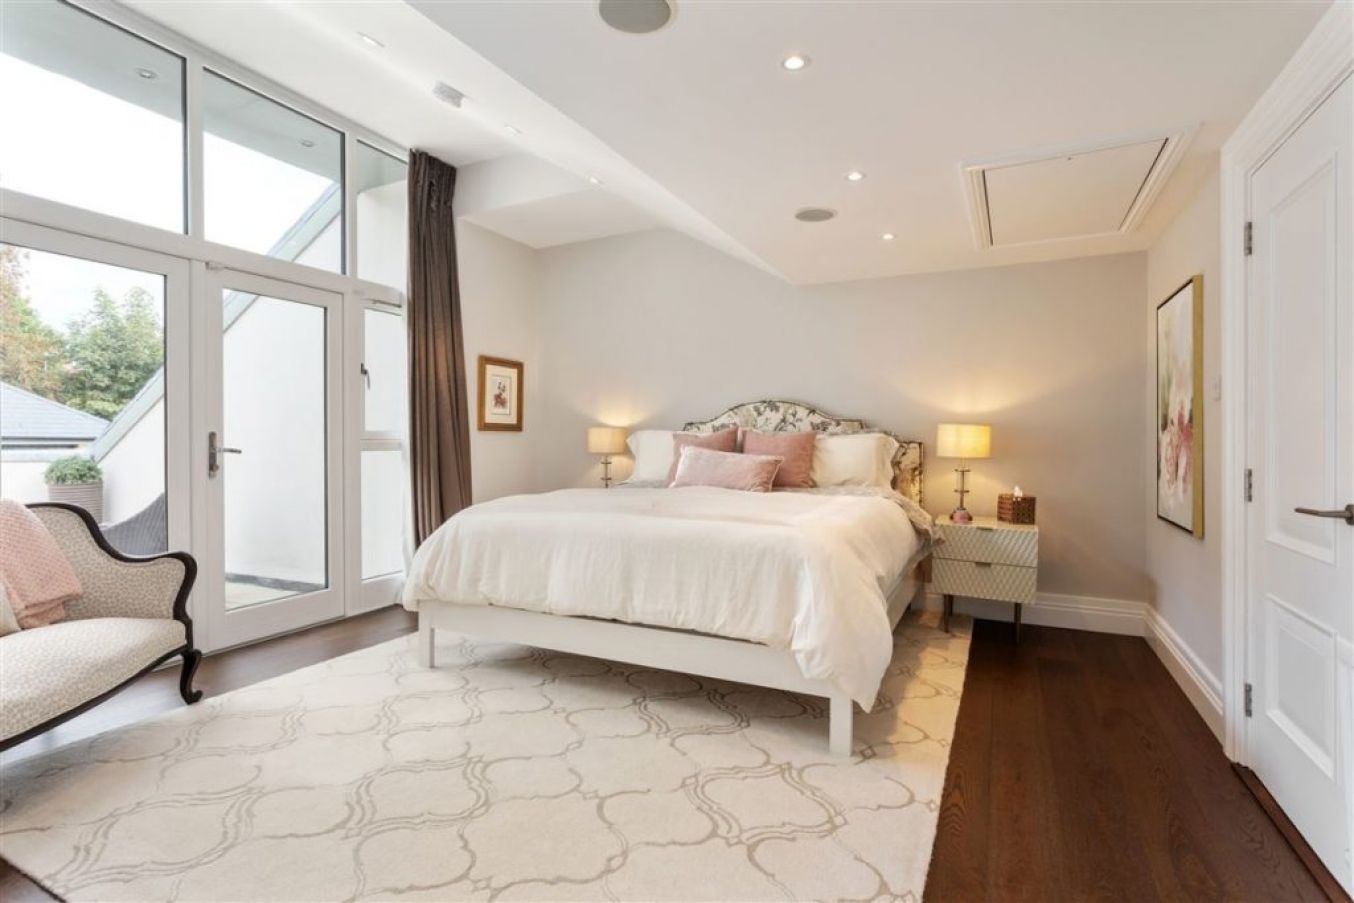 Master Bedroom Photo: Myhome.ie